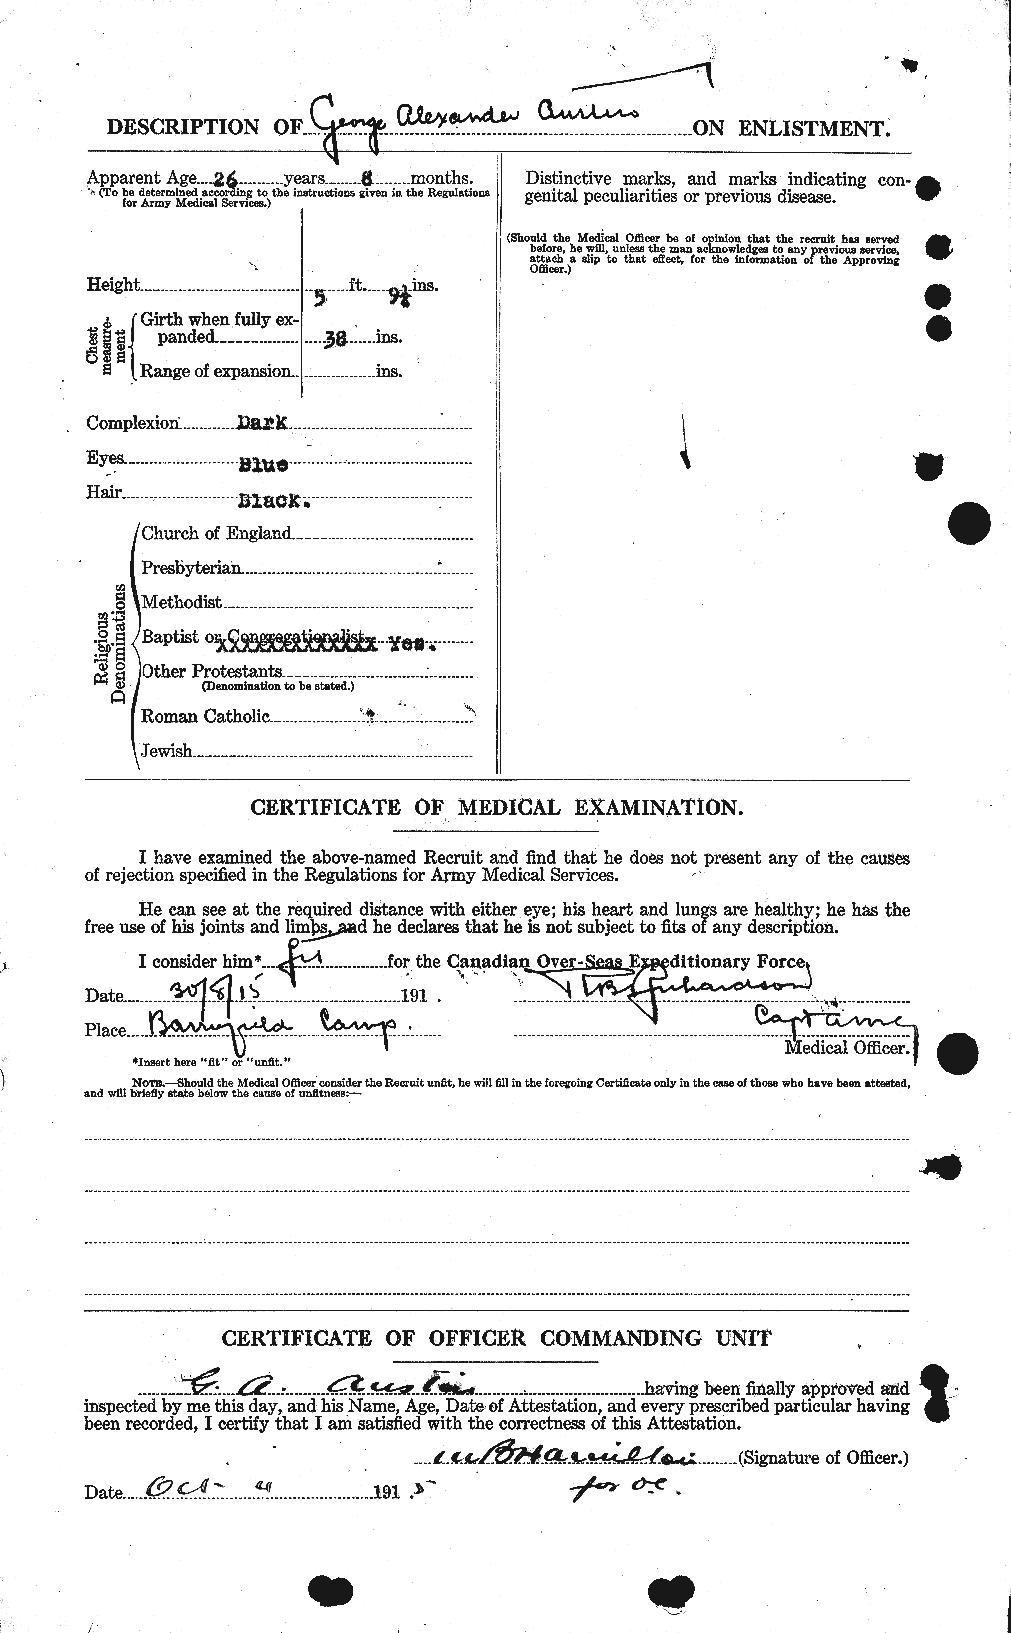 Personnel Records of the First World War - CEF 215385b